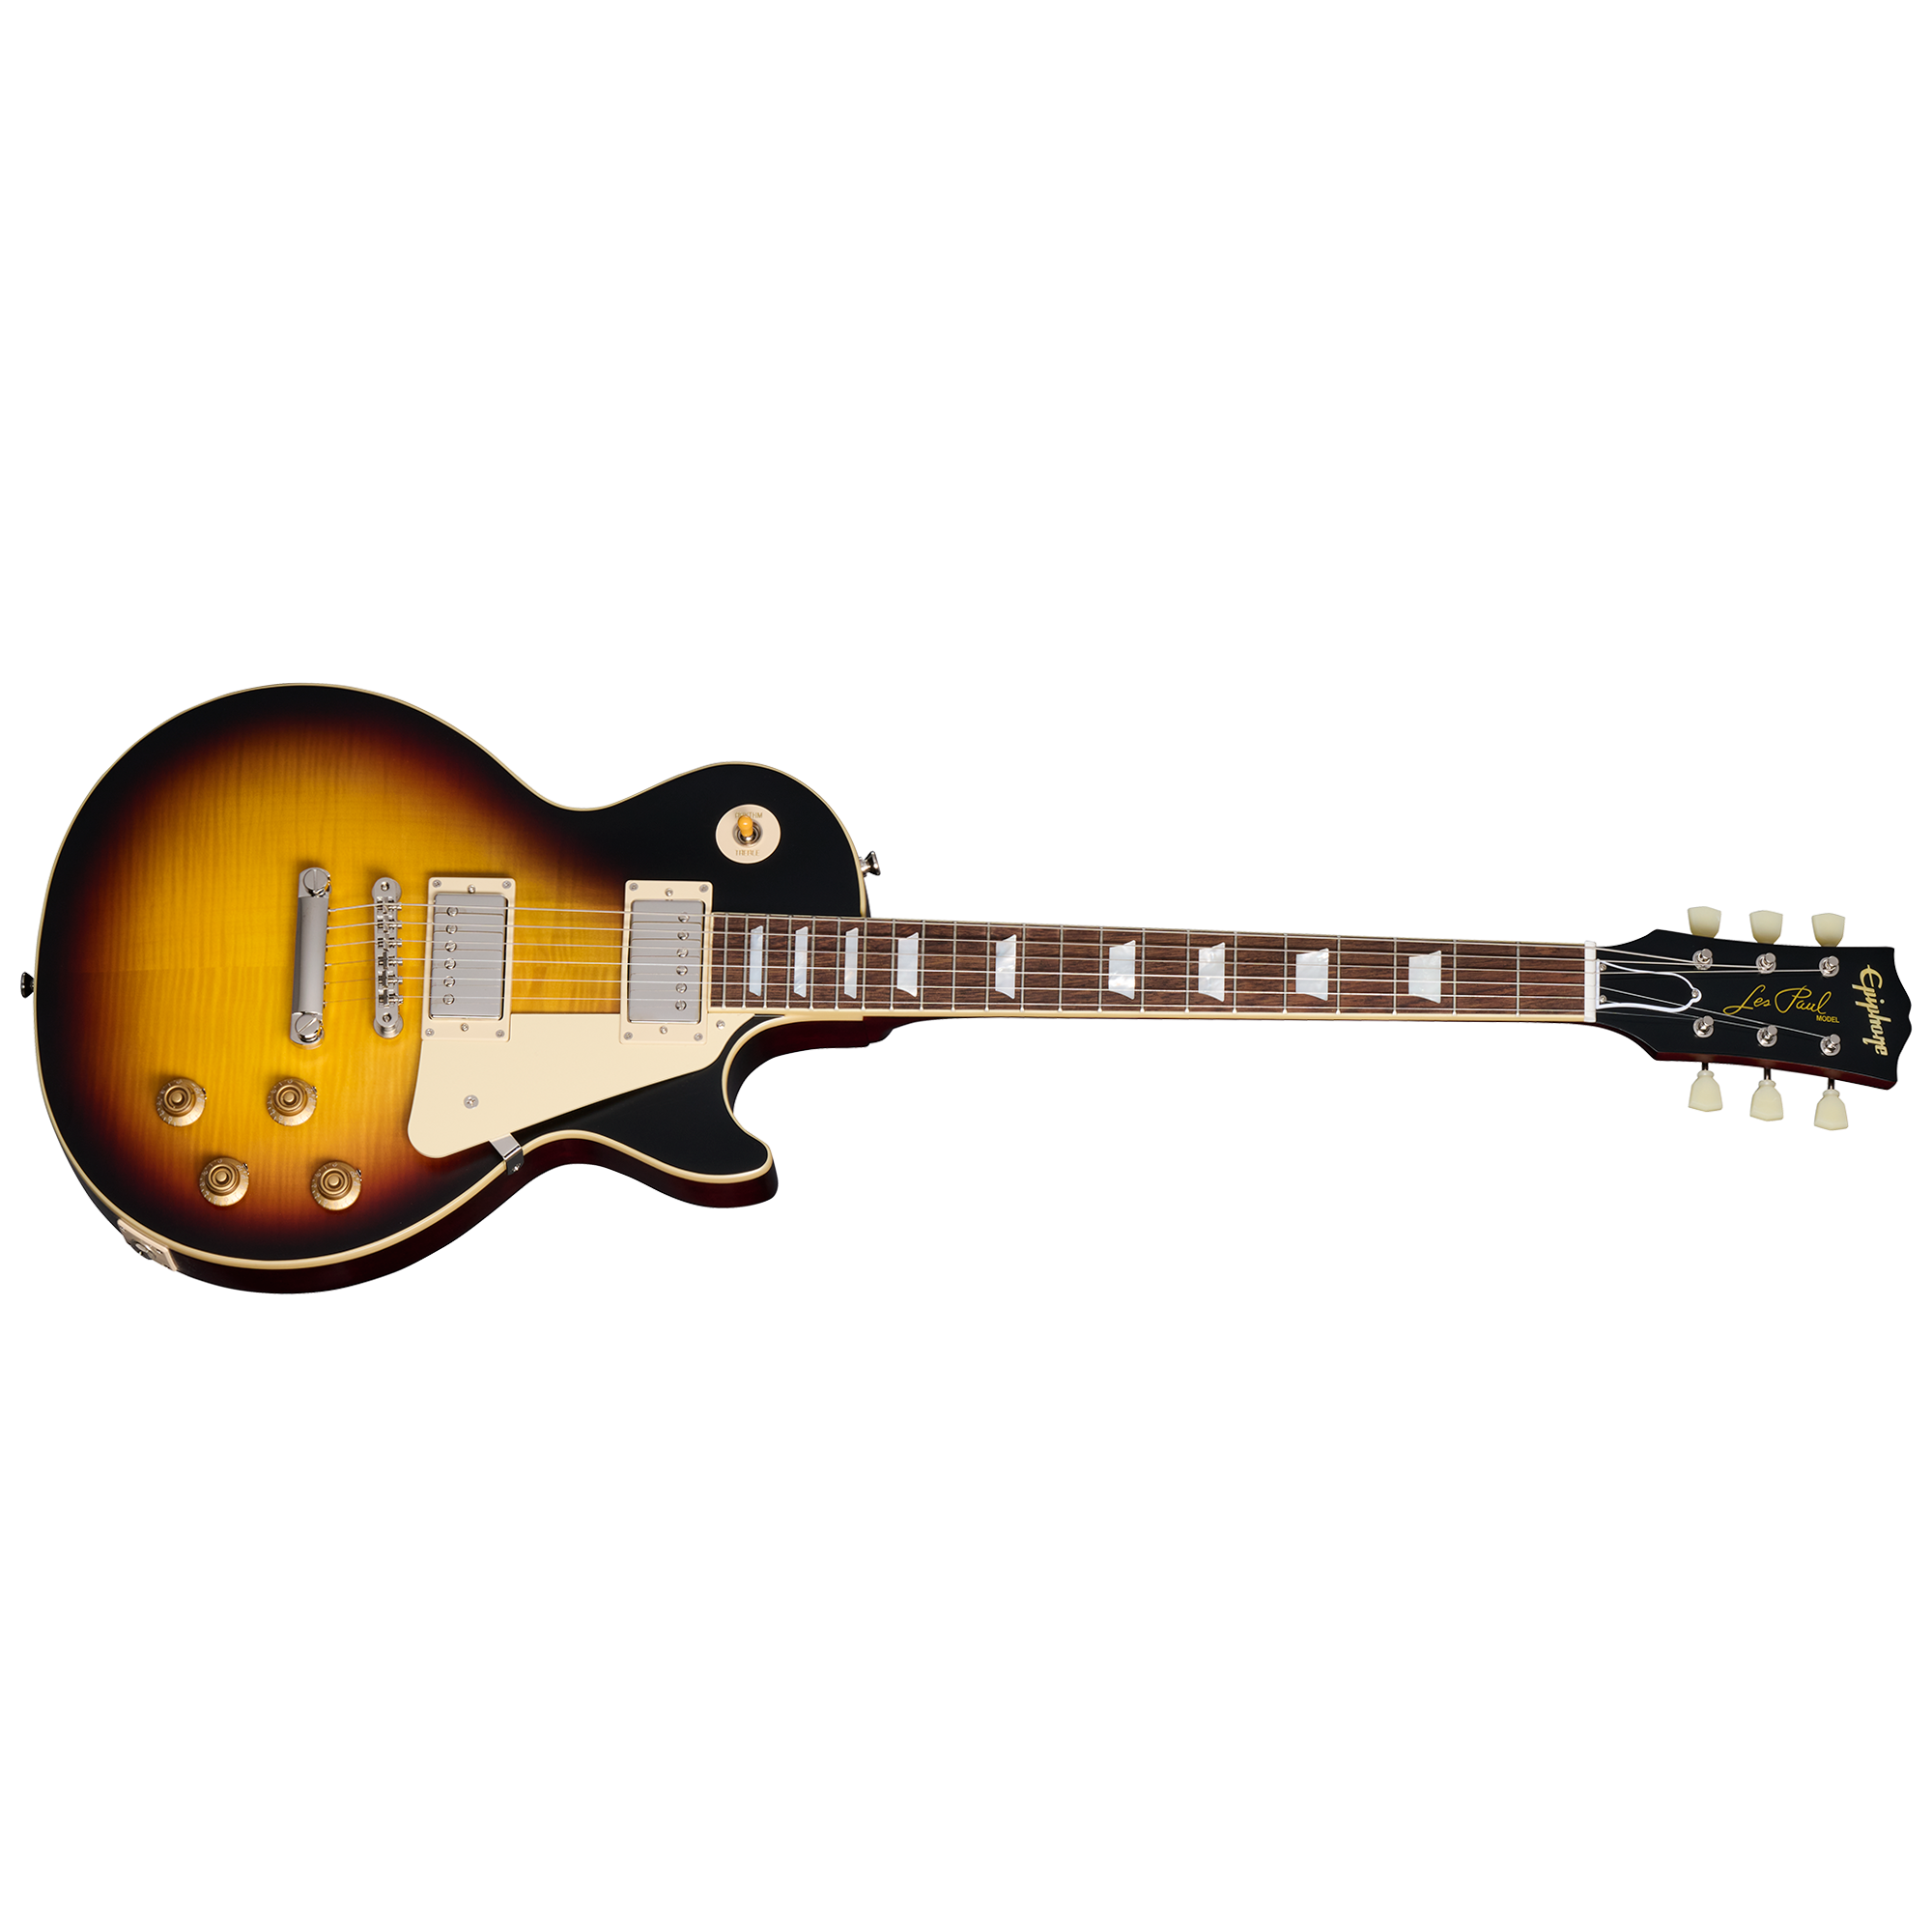 Epiphone ( GIBSON HEADSTOCK ) 1959 Les Paul Standard Electric Guitar with Case - Tobacco Burst ECLPS59TBVNH